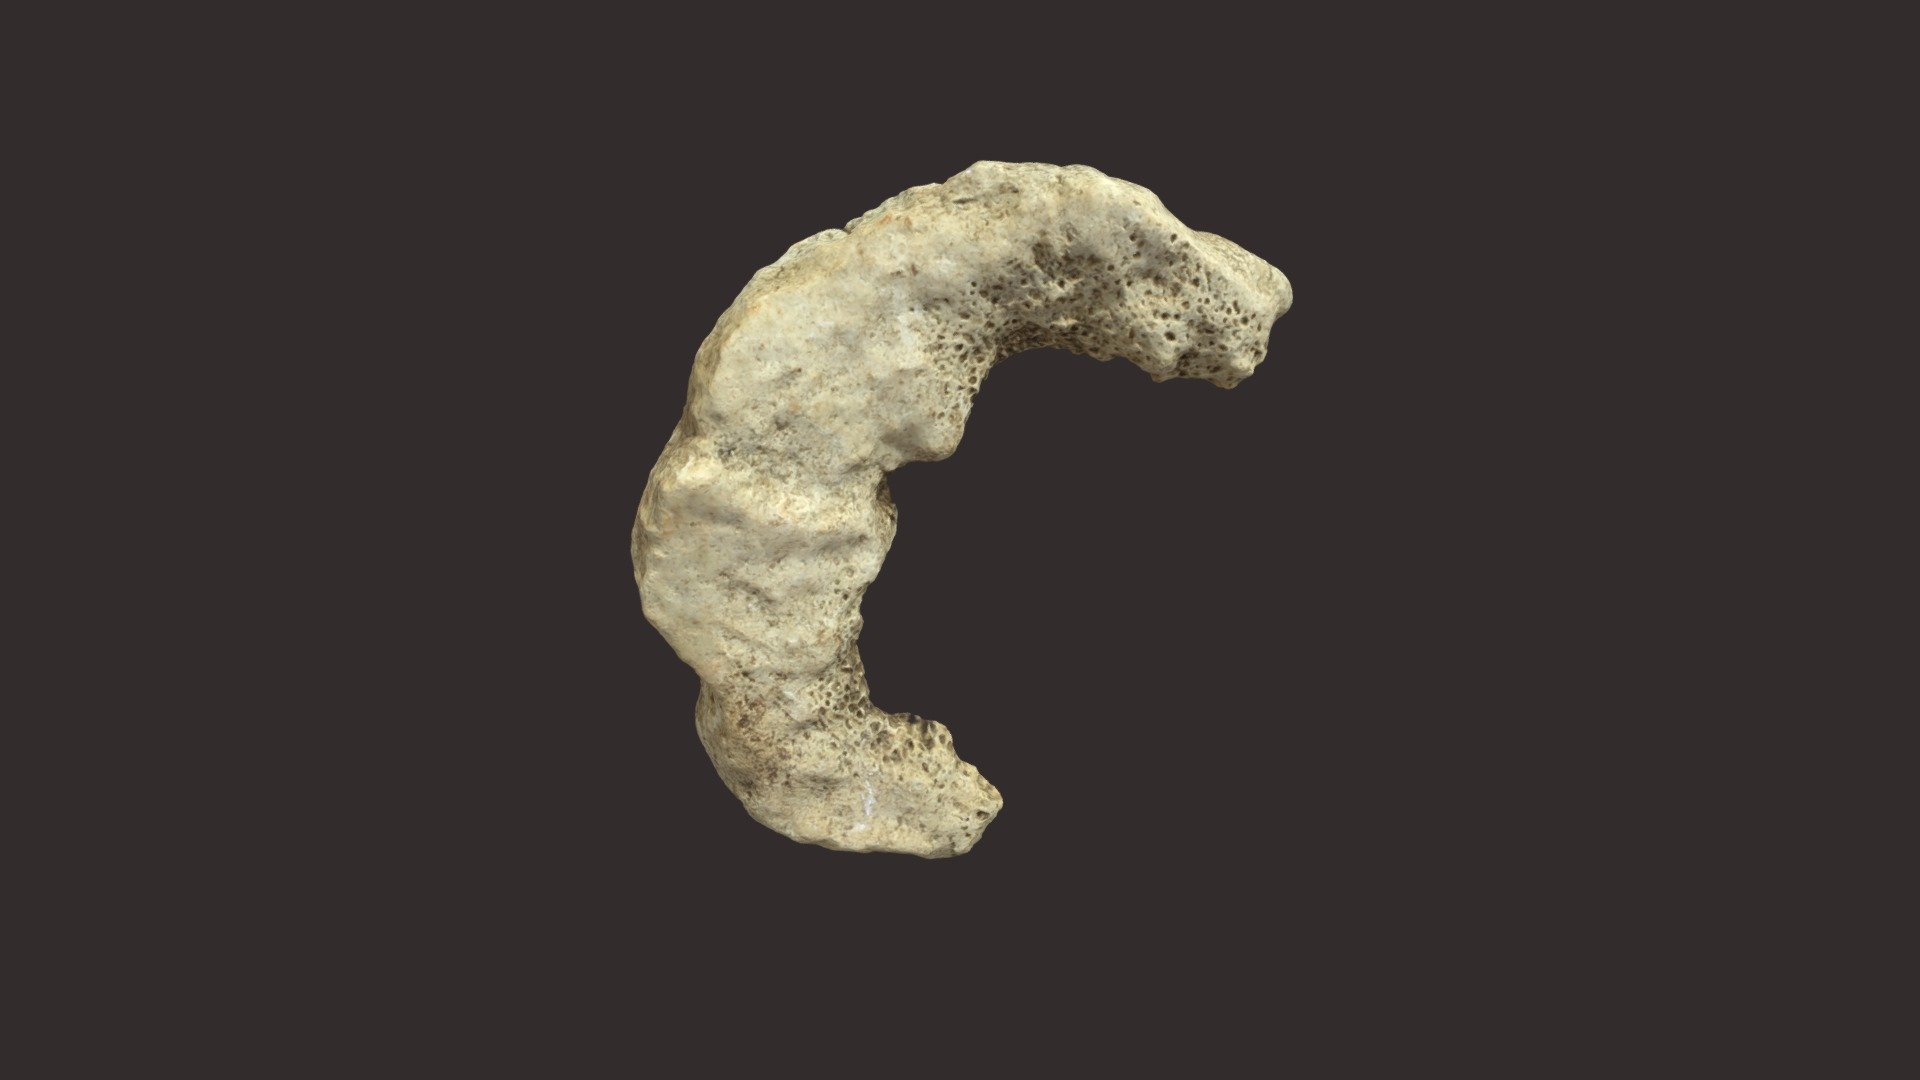 This fragment of antler was discovered at the multi-period settlement mound at Roisinis, Benbecula, and is probably processing waste from antler craftwork. The model was produced as a test of the technique required for modelling using Reality Capture 3d model